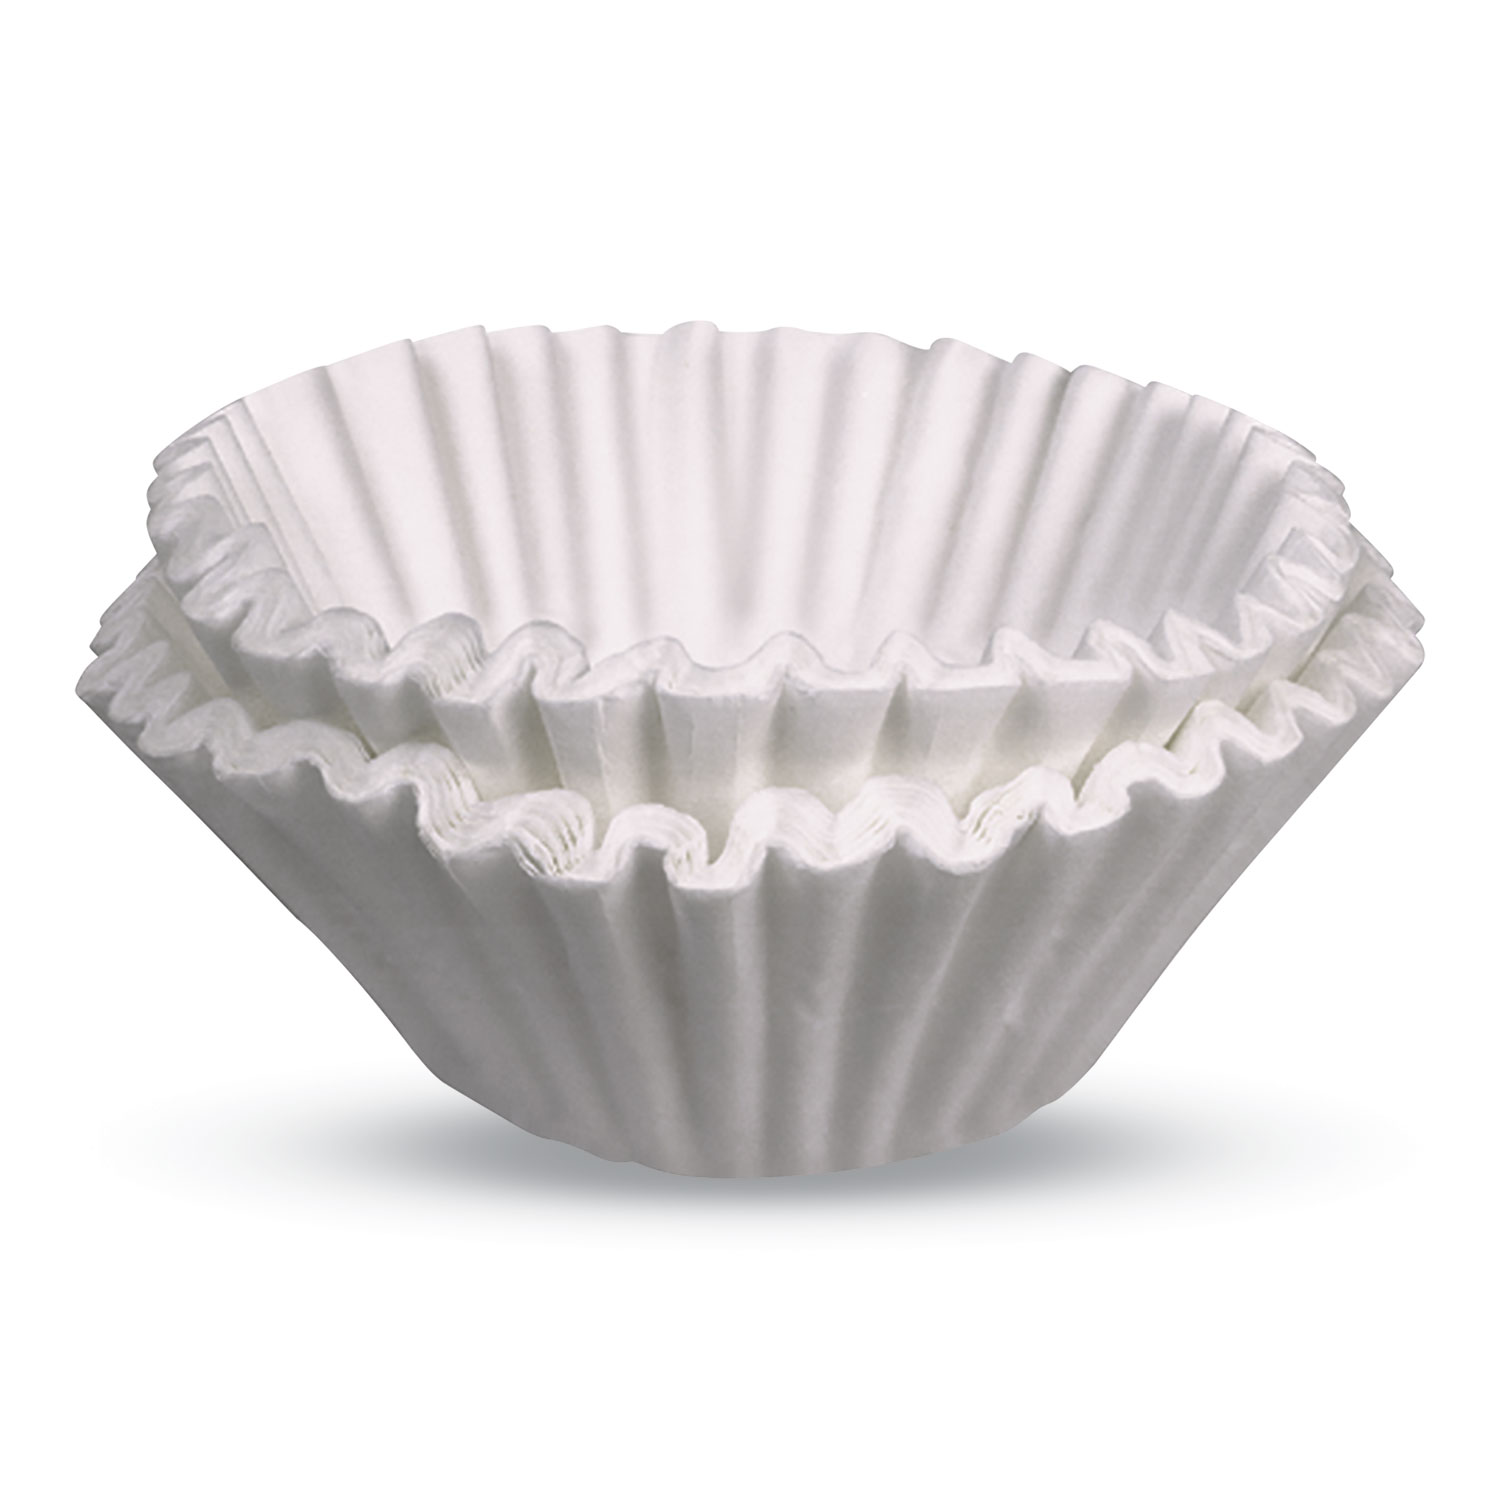 BUNN® Commercial Coffee Filters, Gourmet C Funnel, 8-Cup, White, 500/Pack, 2 Packs/Carton